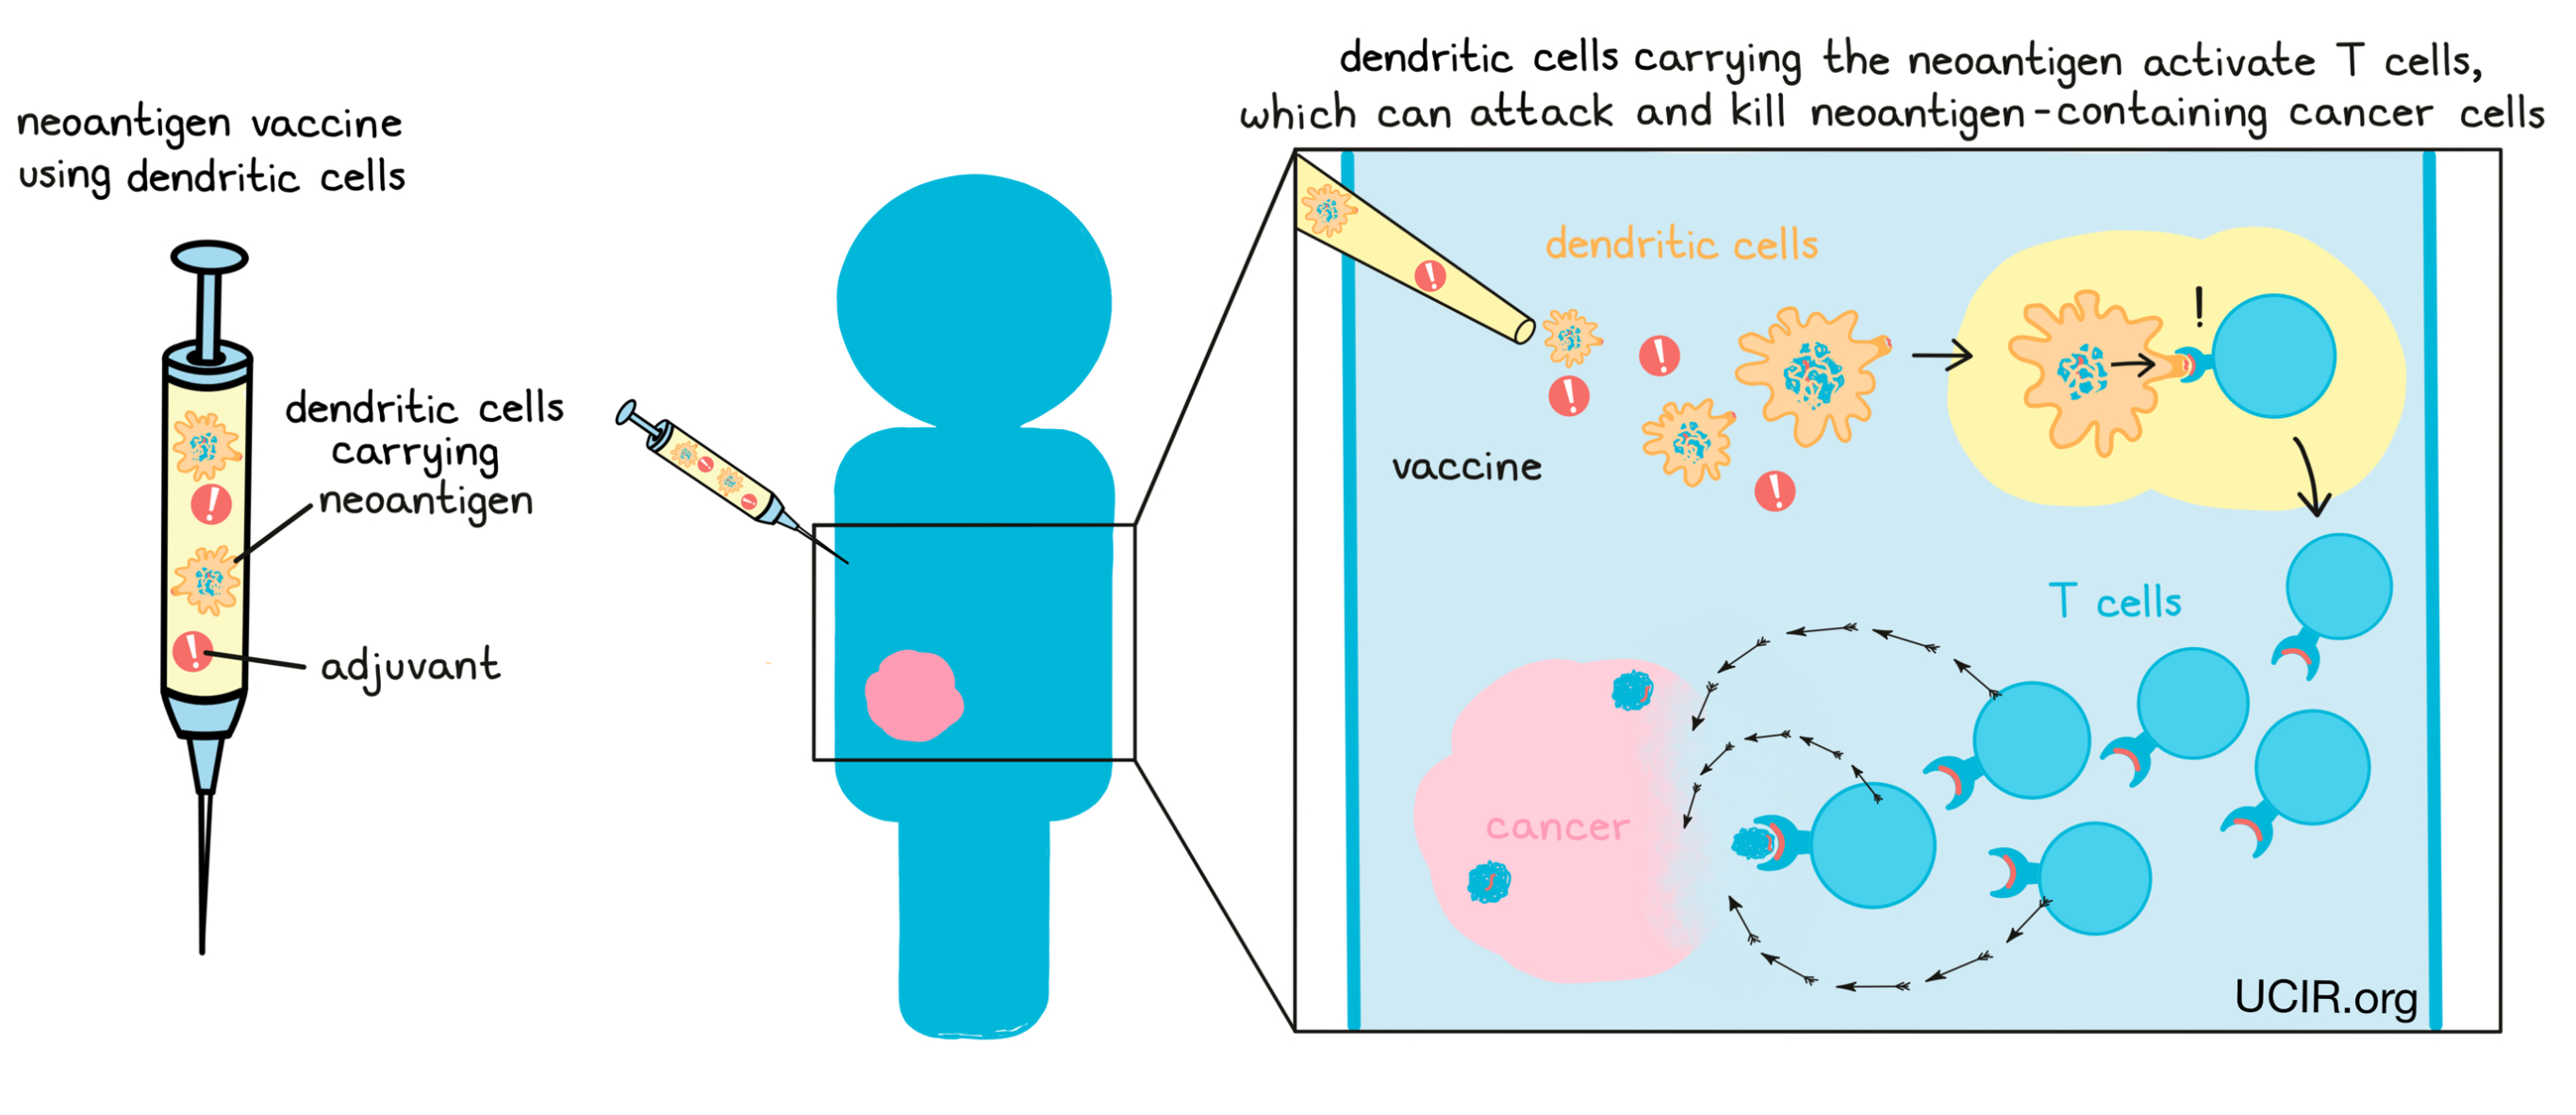 Illustration showing what's in a neoantigen vaccine using dendritic cells